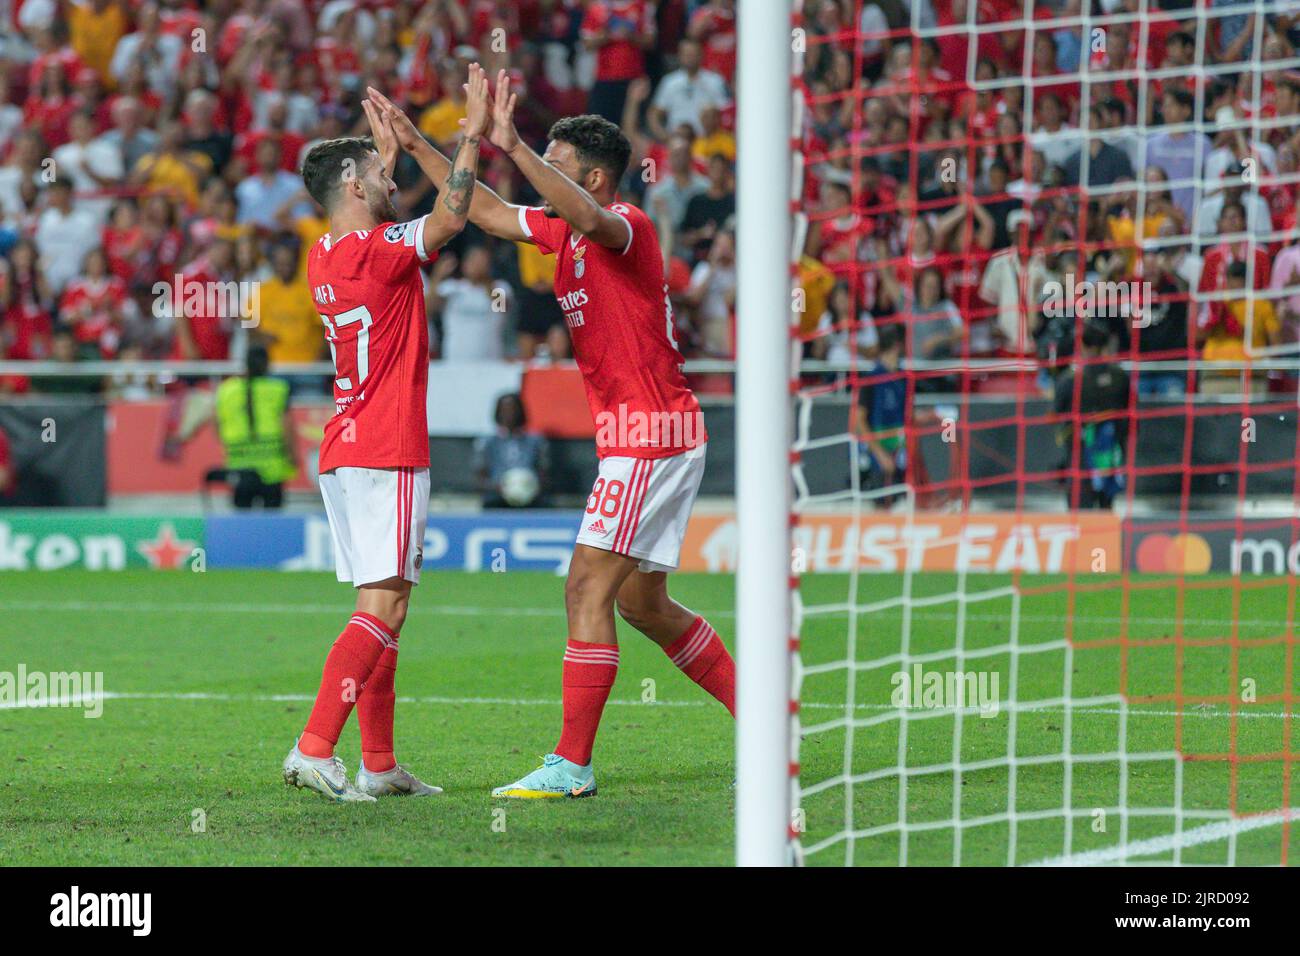 Lisbon, Portugal. August 23, 2022. Lisbon, Portugal. Benfica's forward from Portugal Rafa Silva (27) celebrating with Benfica's forward from Portugal Goncalo Ramos (88) after scoring a goal during the game of the 2nd Leg of the Playoffs for the UEFA Champions League, Benfica vs Dynamo Kyiv Credit: Alexandre de Sousa/Alamy Live News Stock Photo